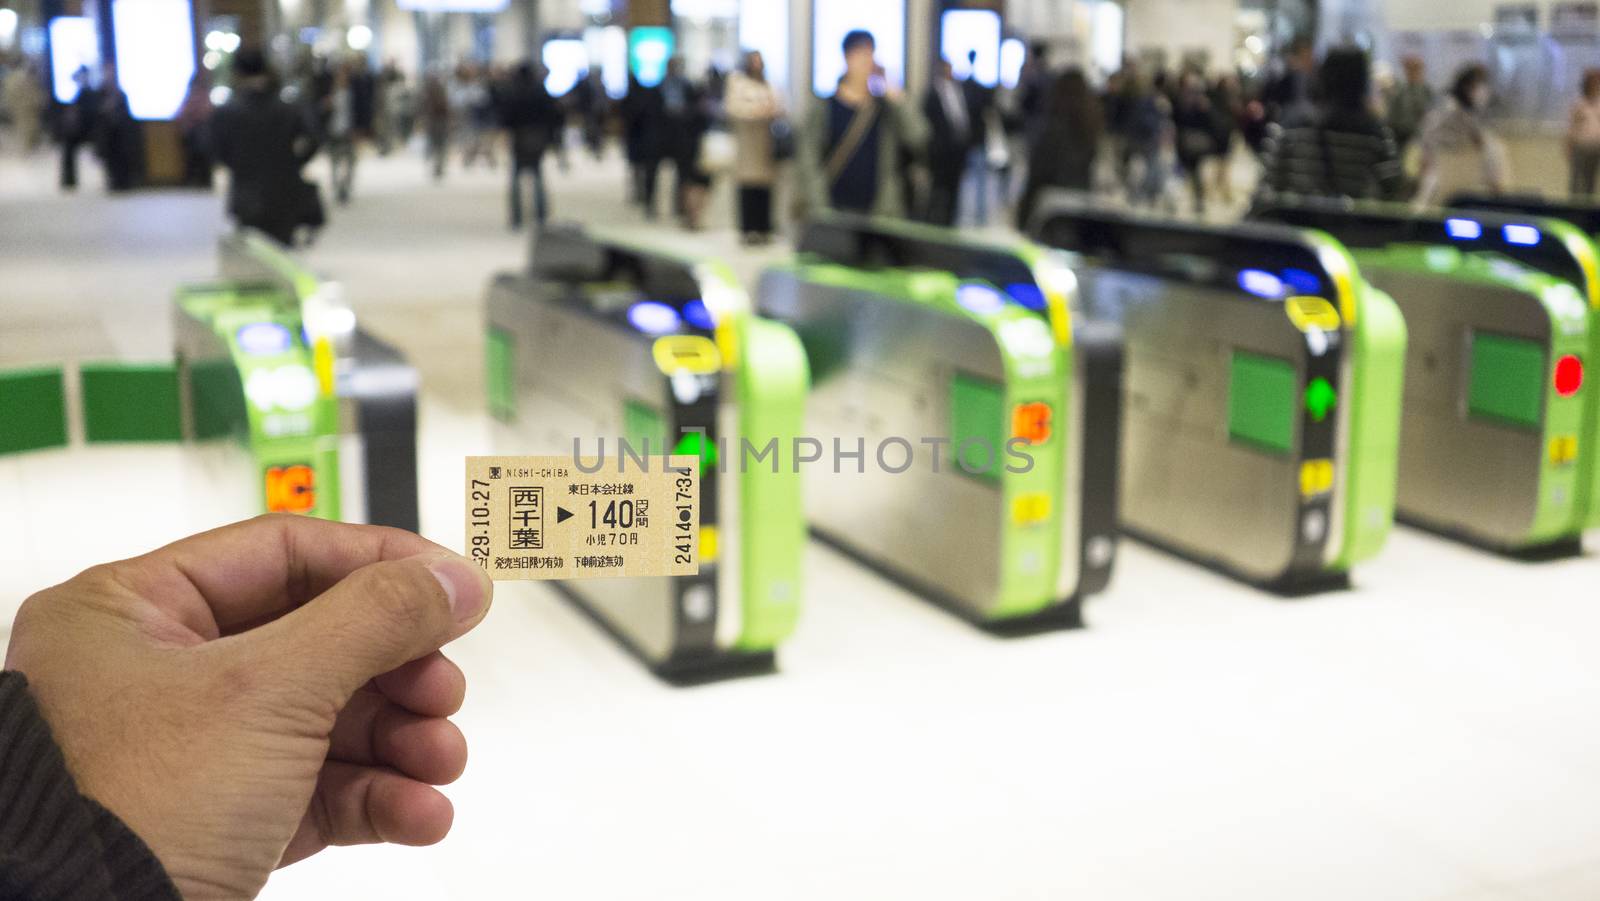 The tourist use ticket of train at at railway station by Kingsman911